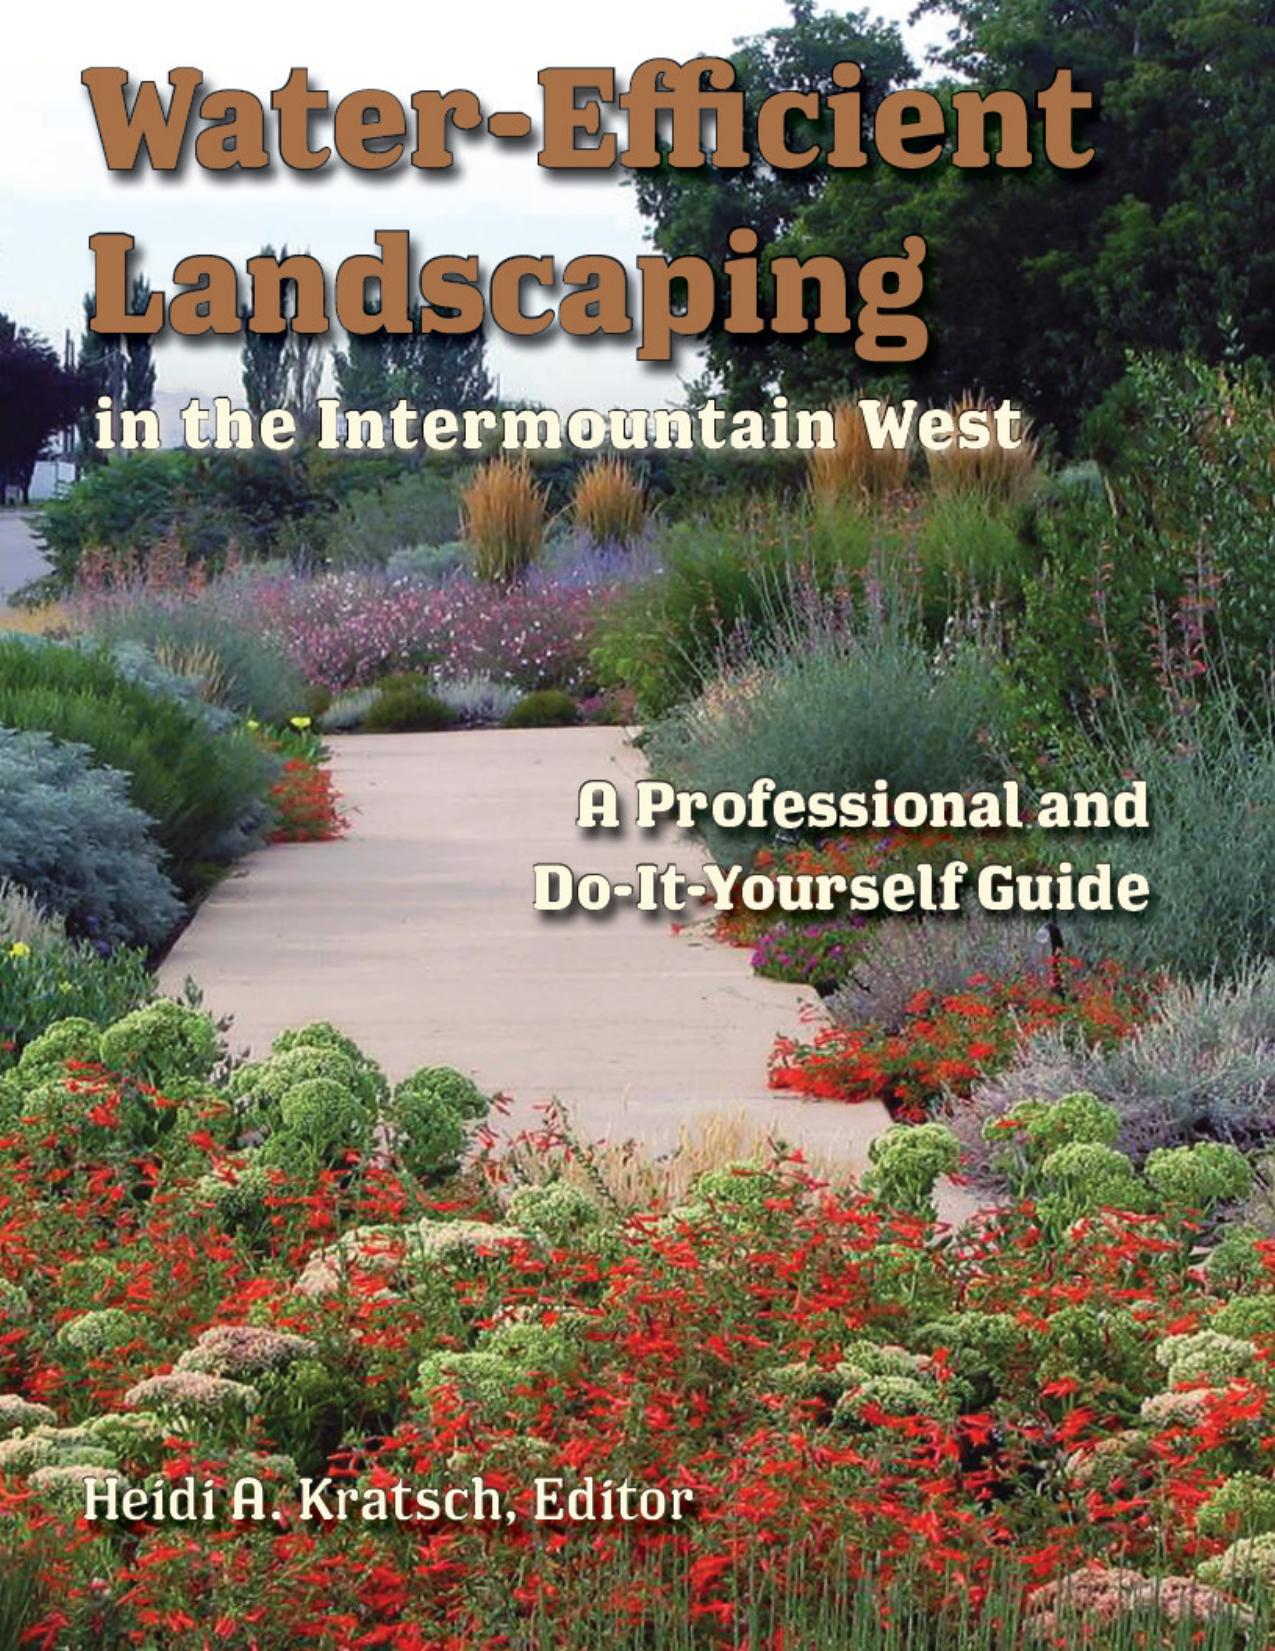 Water-Efficient Landscaping in the Intermountain West : A Professional and Do-It-Yourself Guide by Heidi Kratsch